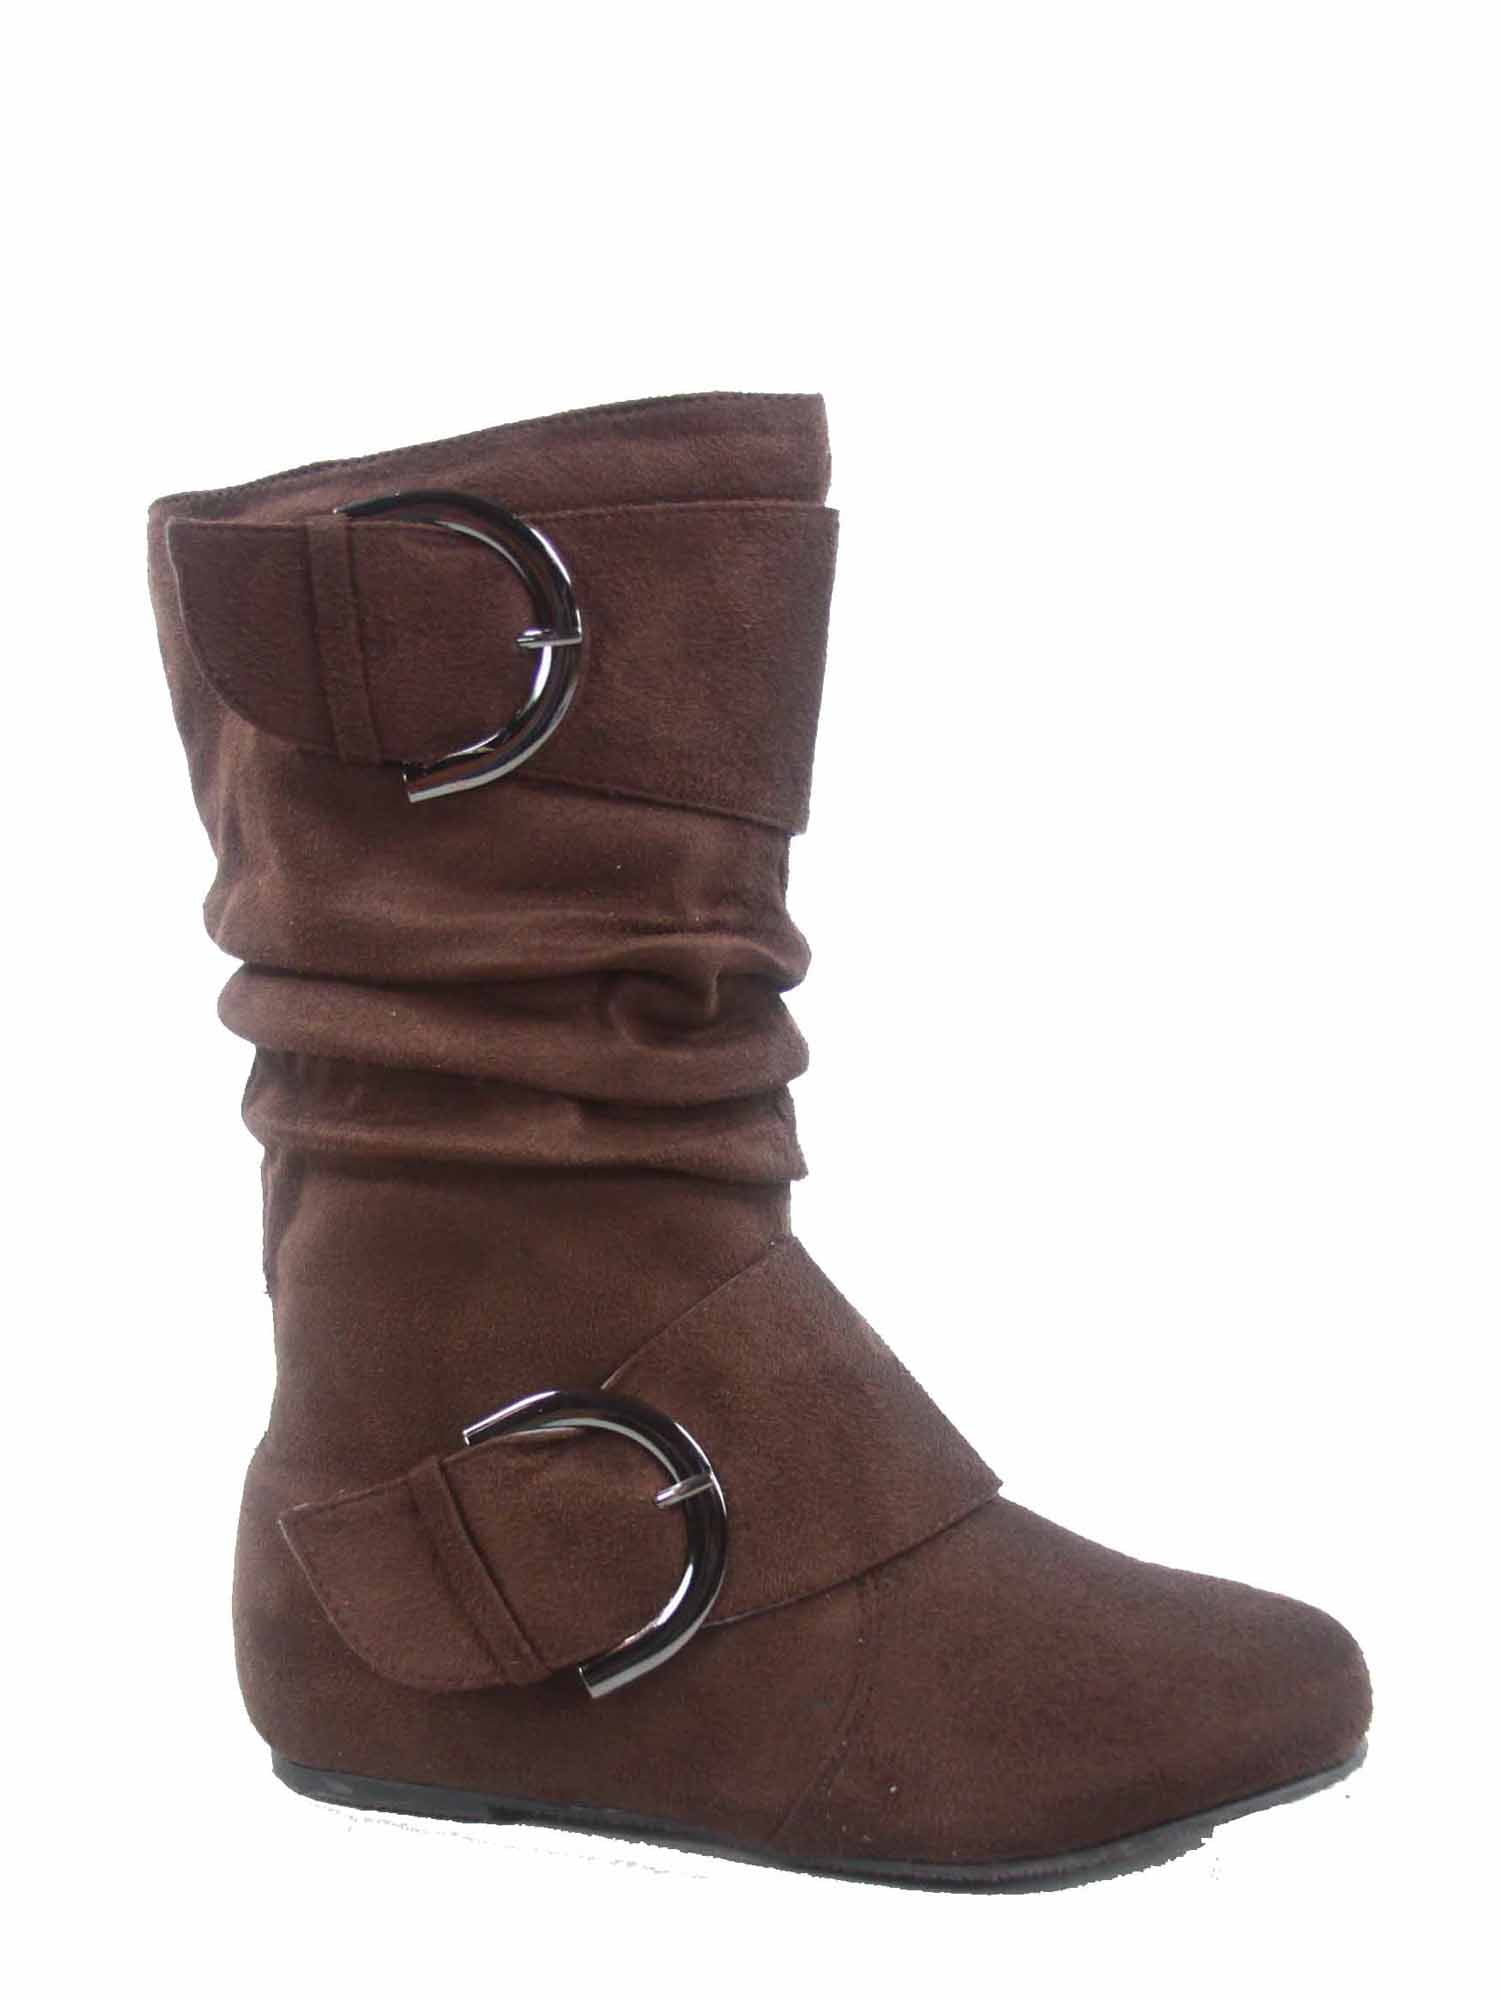 Data- 80k Youth Girl's Kid's Zipper Flat Heel Round Toe Buckle Causal Boot  Shoes 